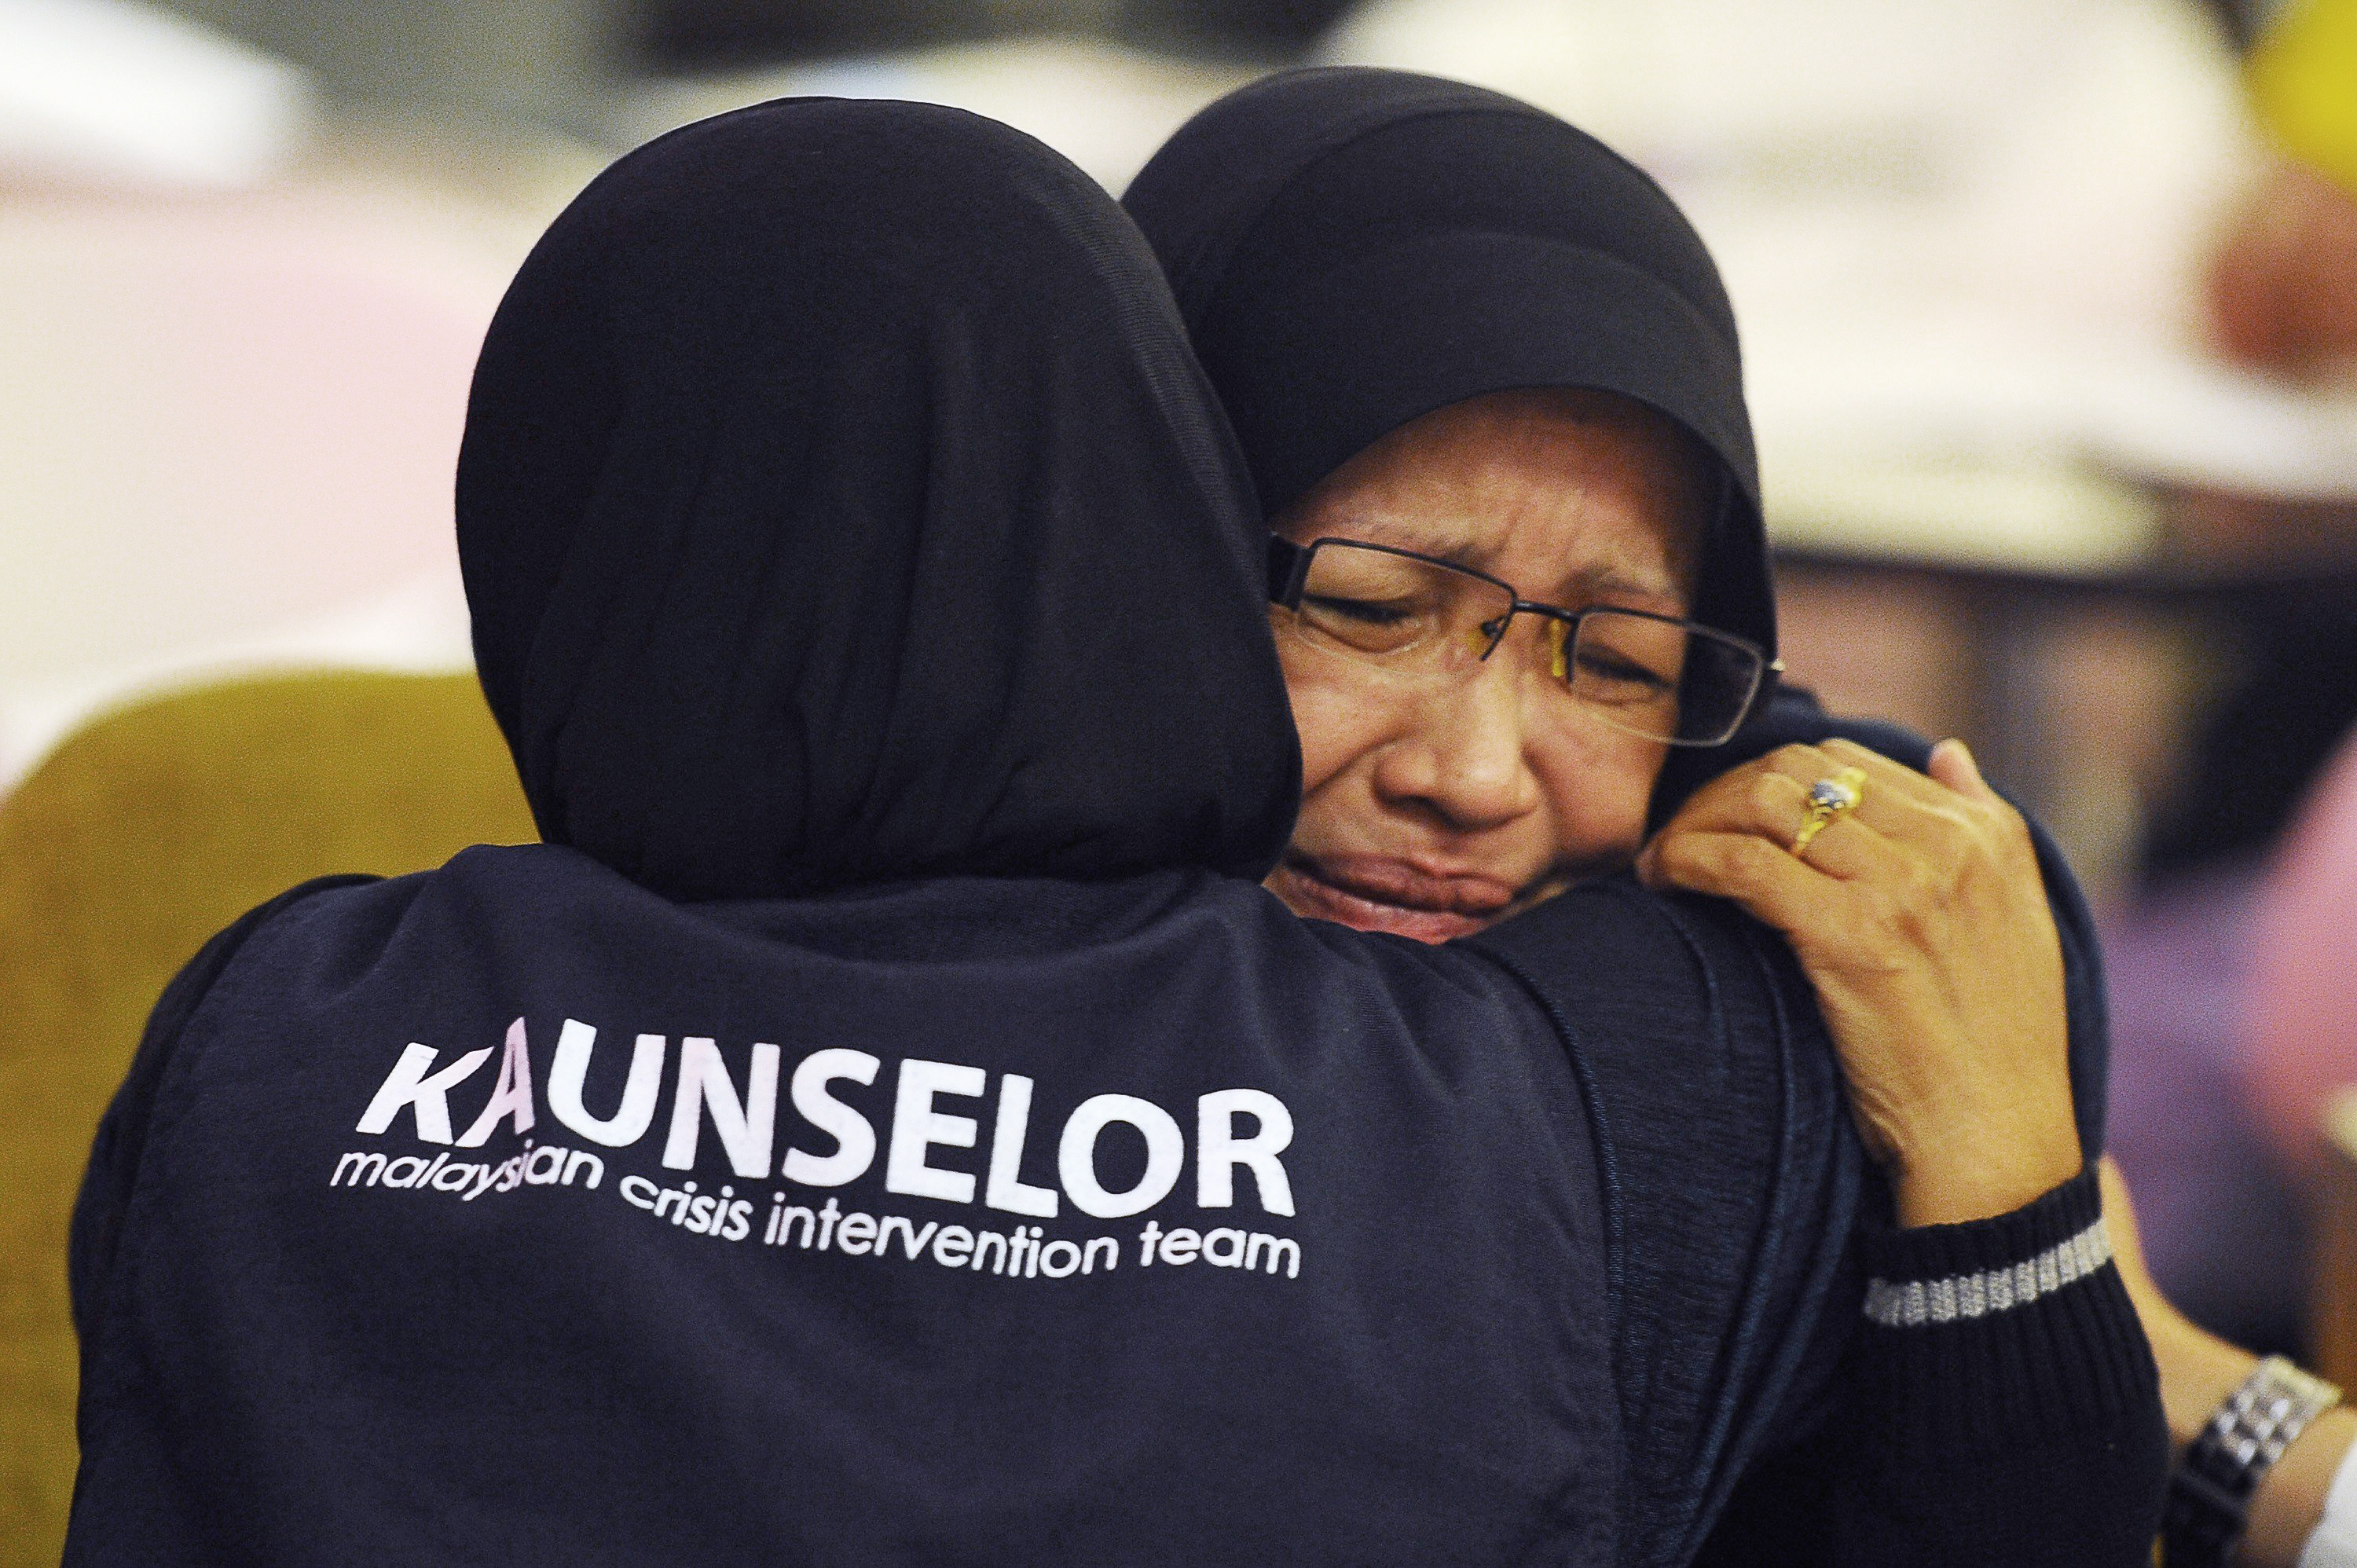 A family member of one of the passengers aboard a missing plane is consoled by a crisis counselor at a hotel in Putrjaya, outside Kuala Lumpur, on March 9, 2014.